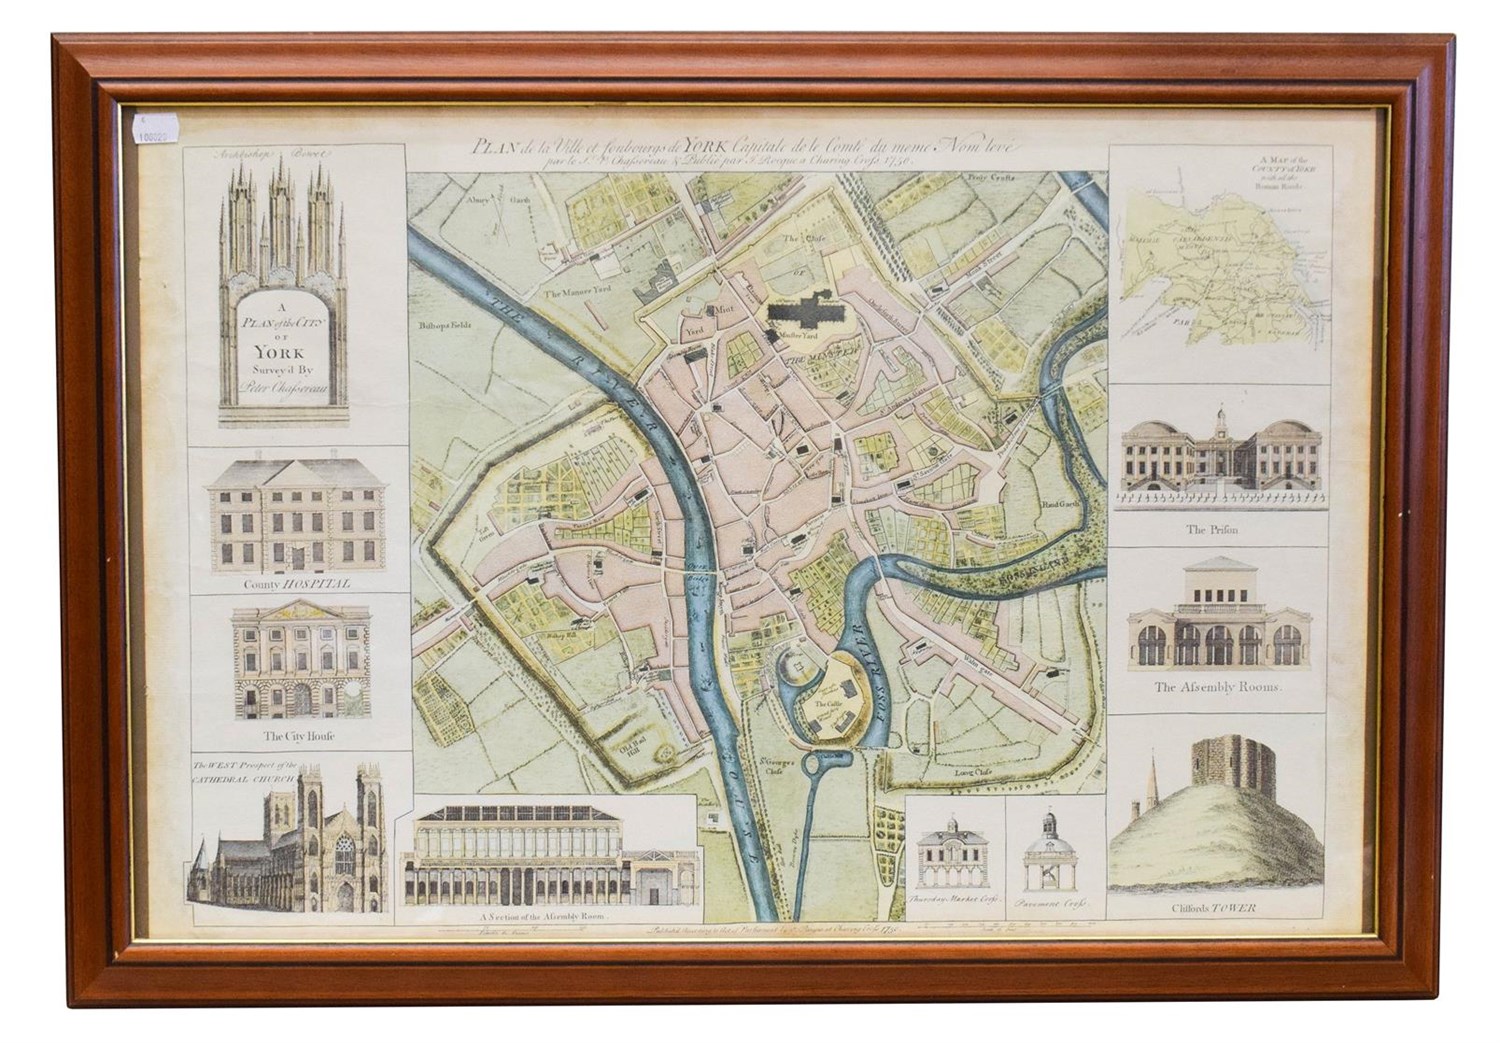 Lot 128 - Chassereau (P.) A Plan of the City of York Survey`d by Peter Chassereau, J. Rocque, 1750 [but later